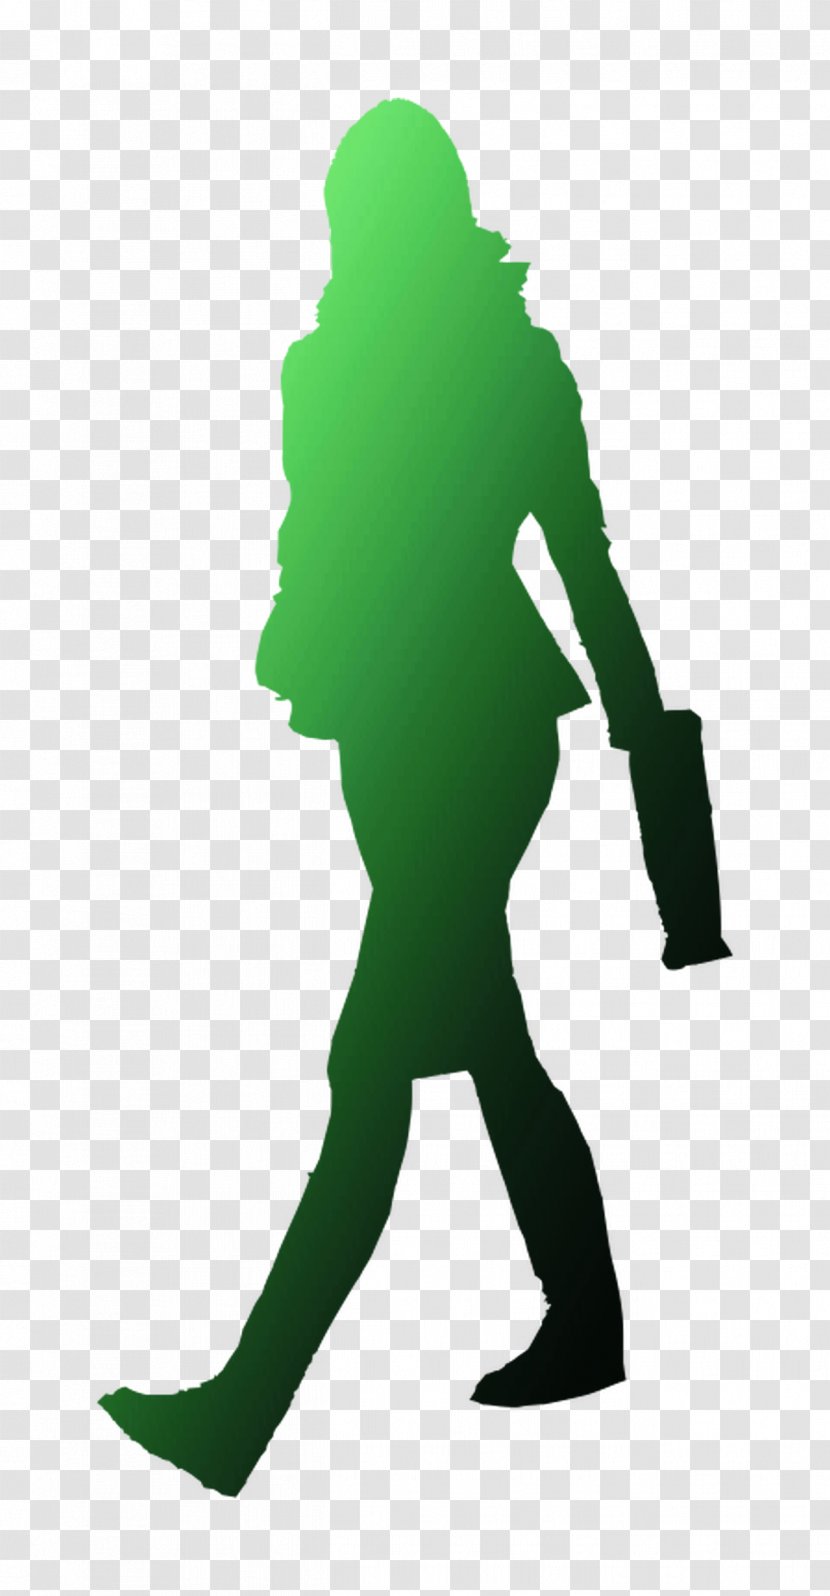 Human Behavior Character Product Design Silhouette - Green Transparent PNG